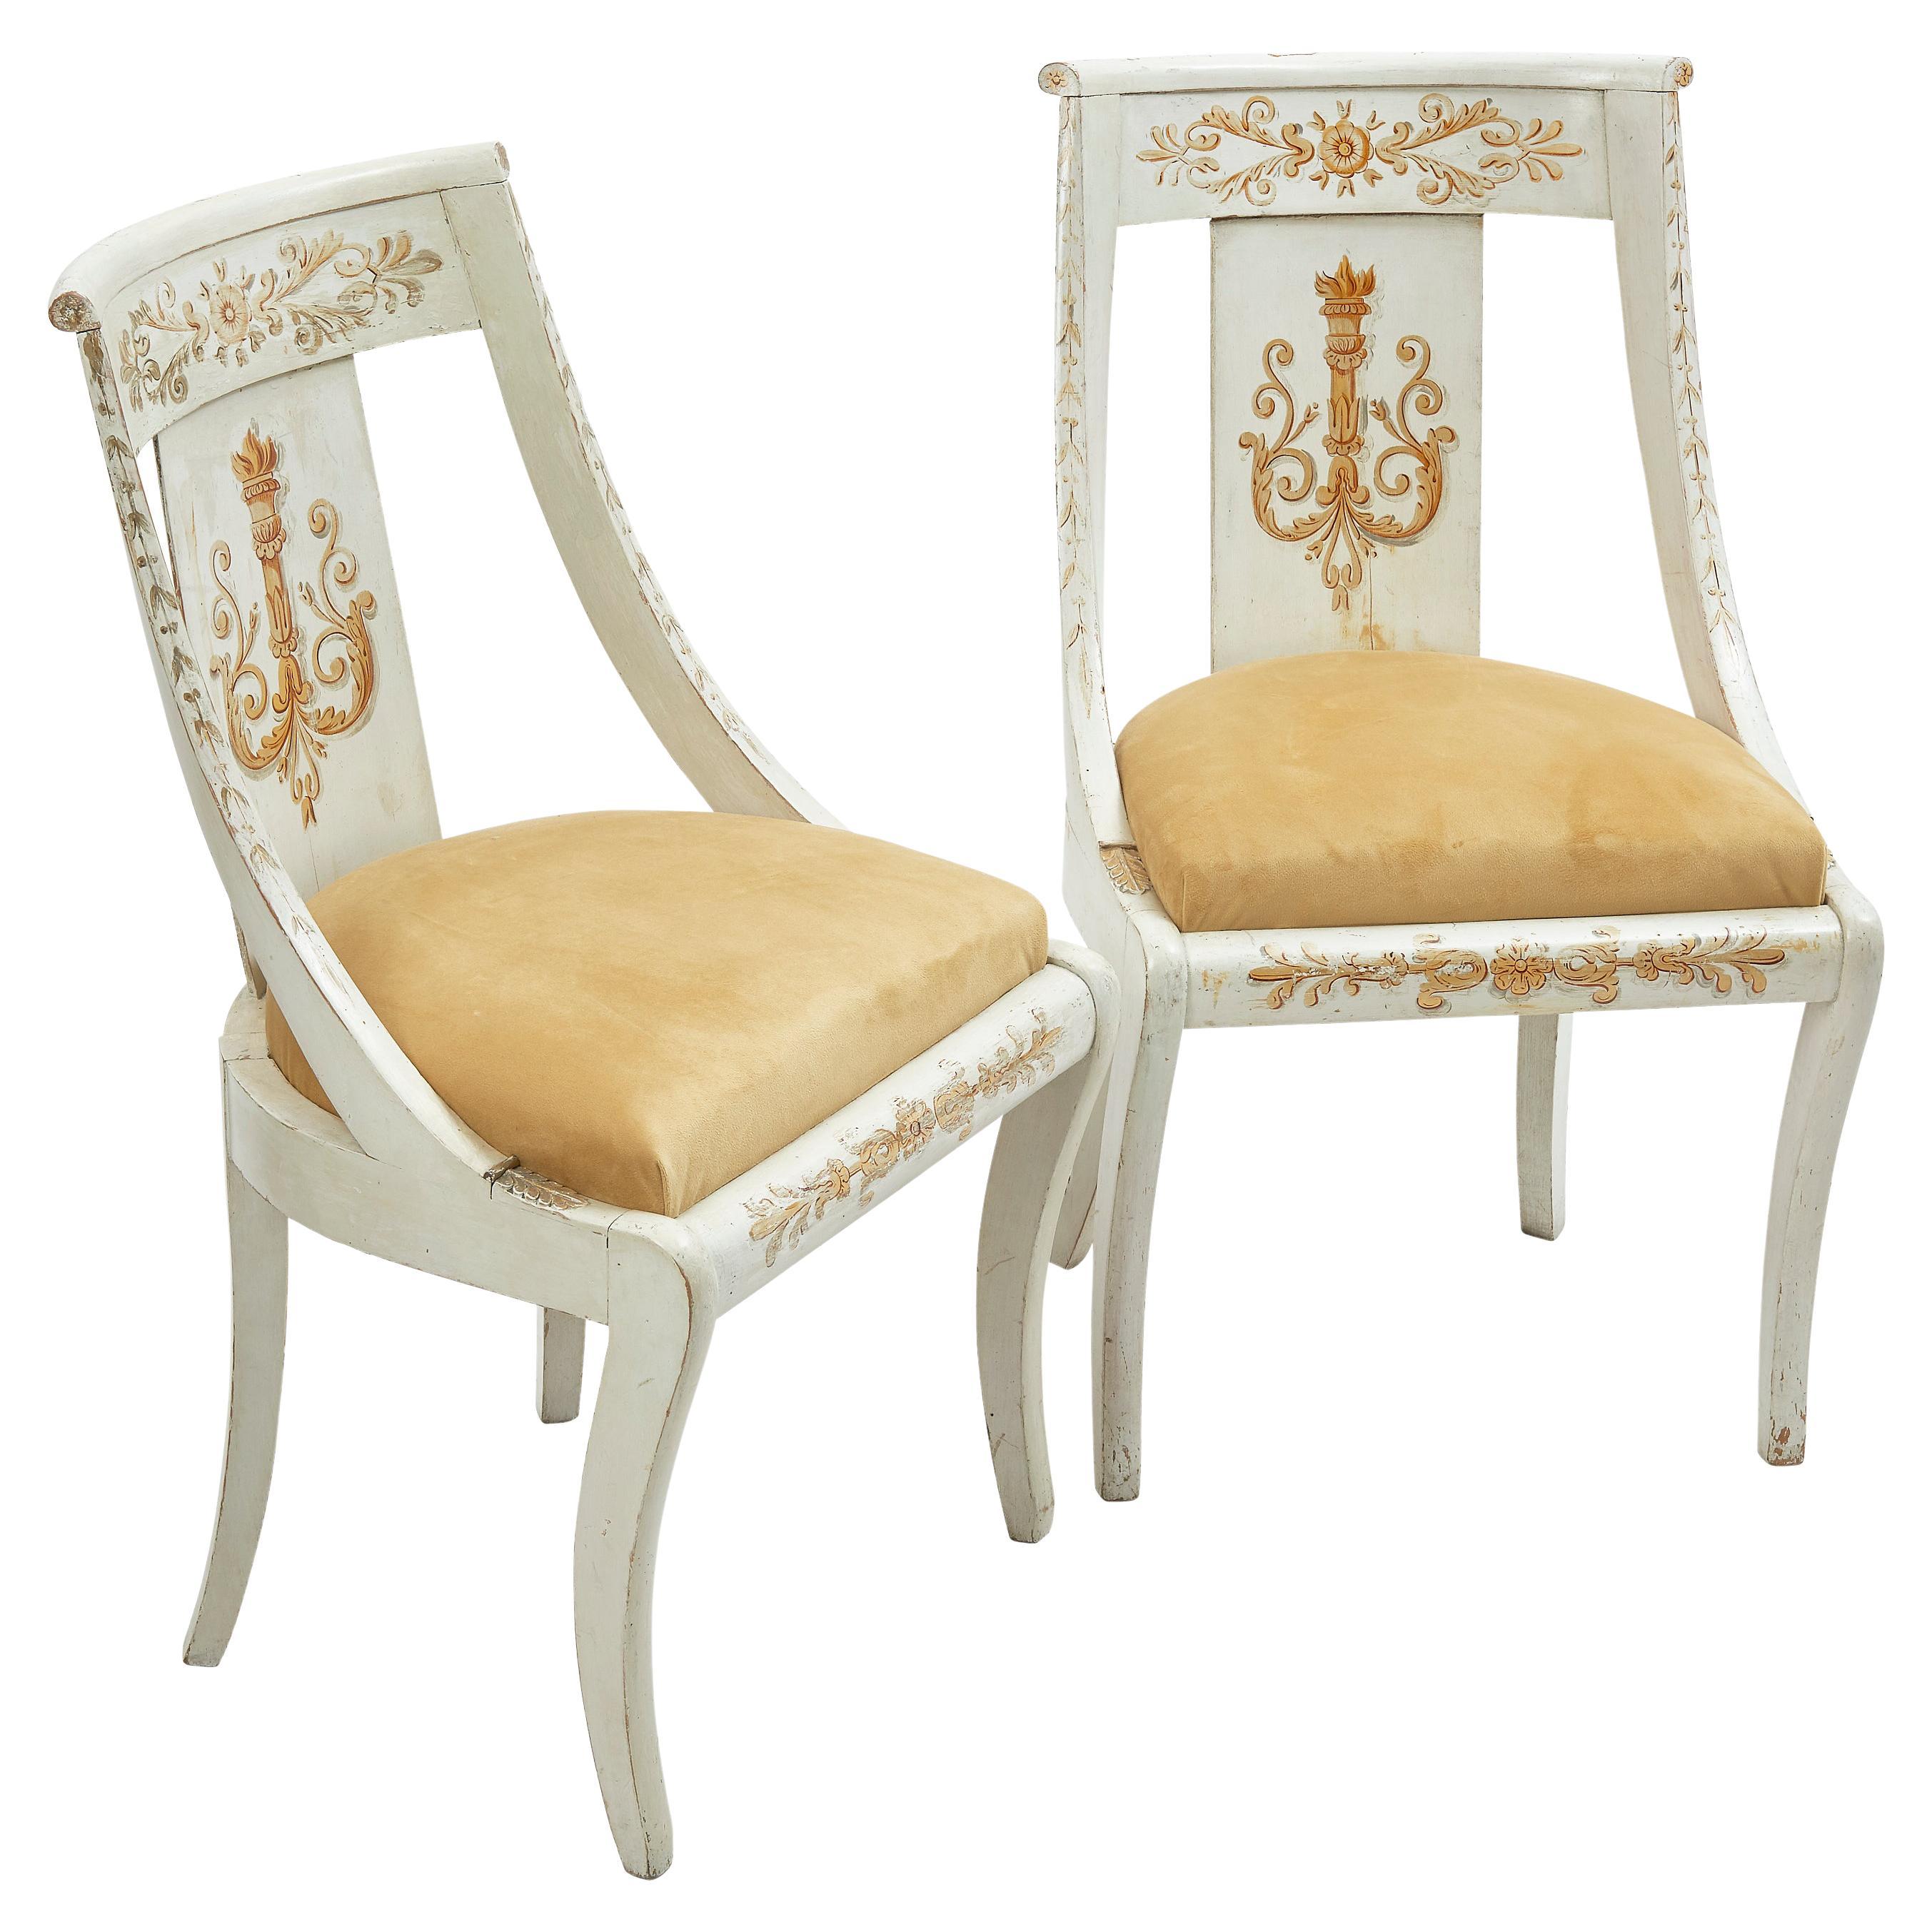 Pair of French White and Gilt Empire Chairs, c.1820 For Sale